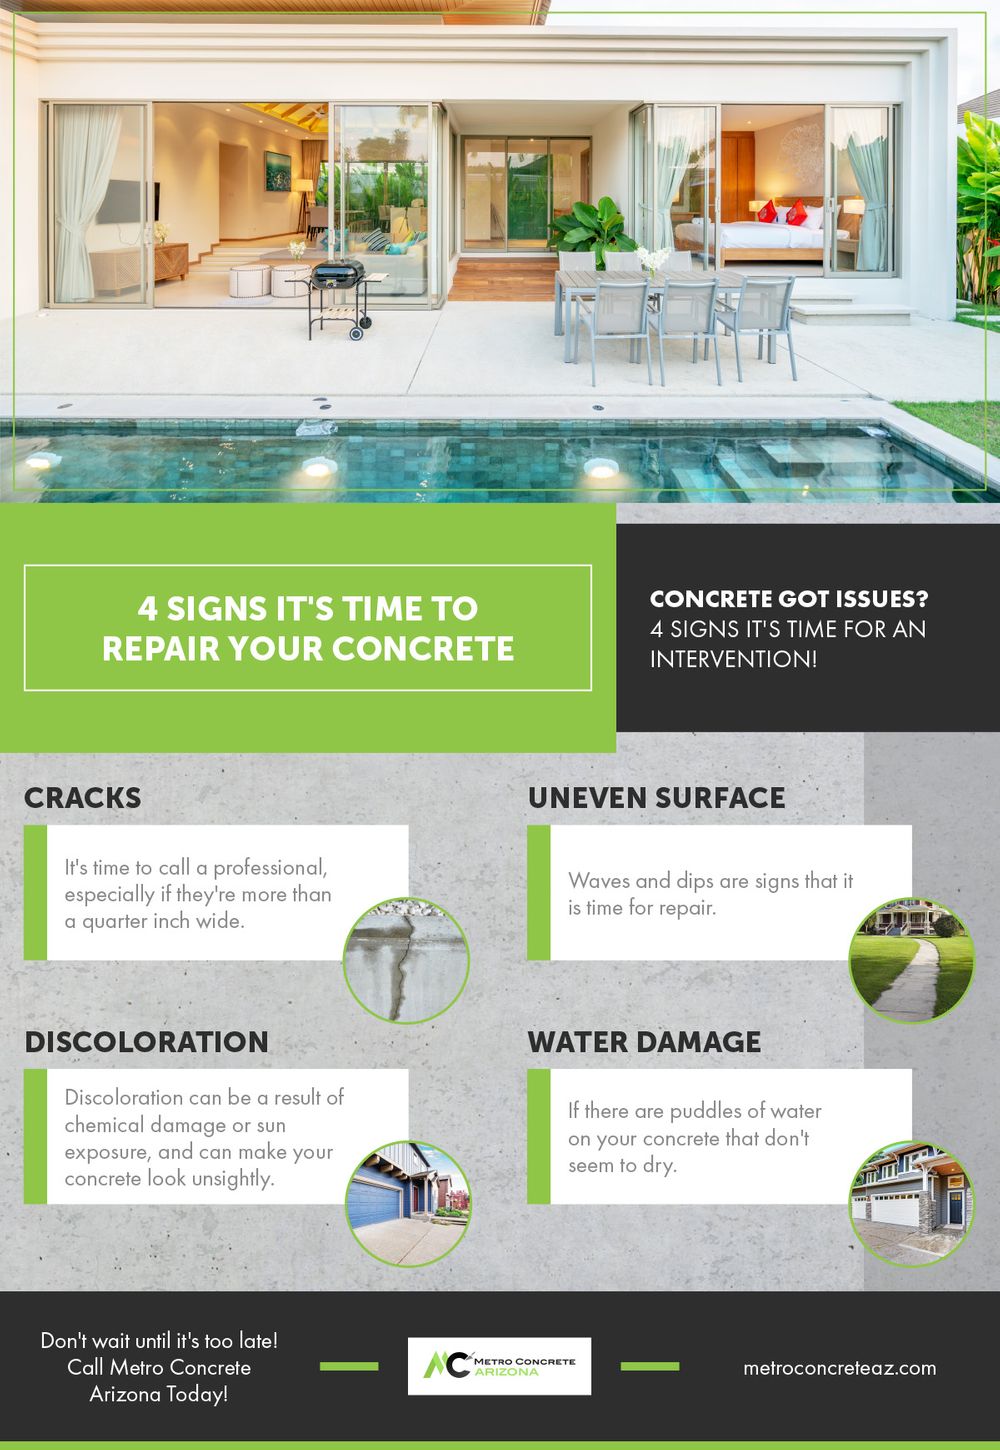 4 Signs It's Time to Repair Your Concrete Infographic.jpg